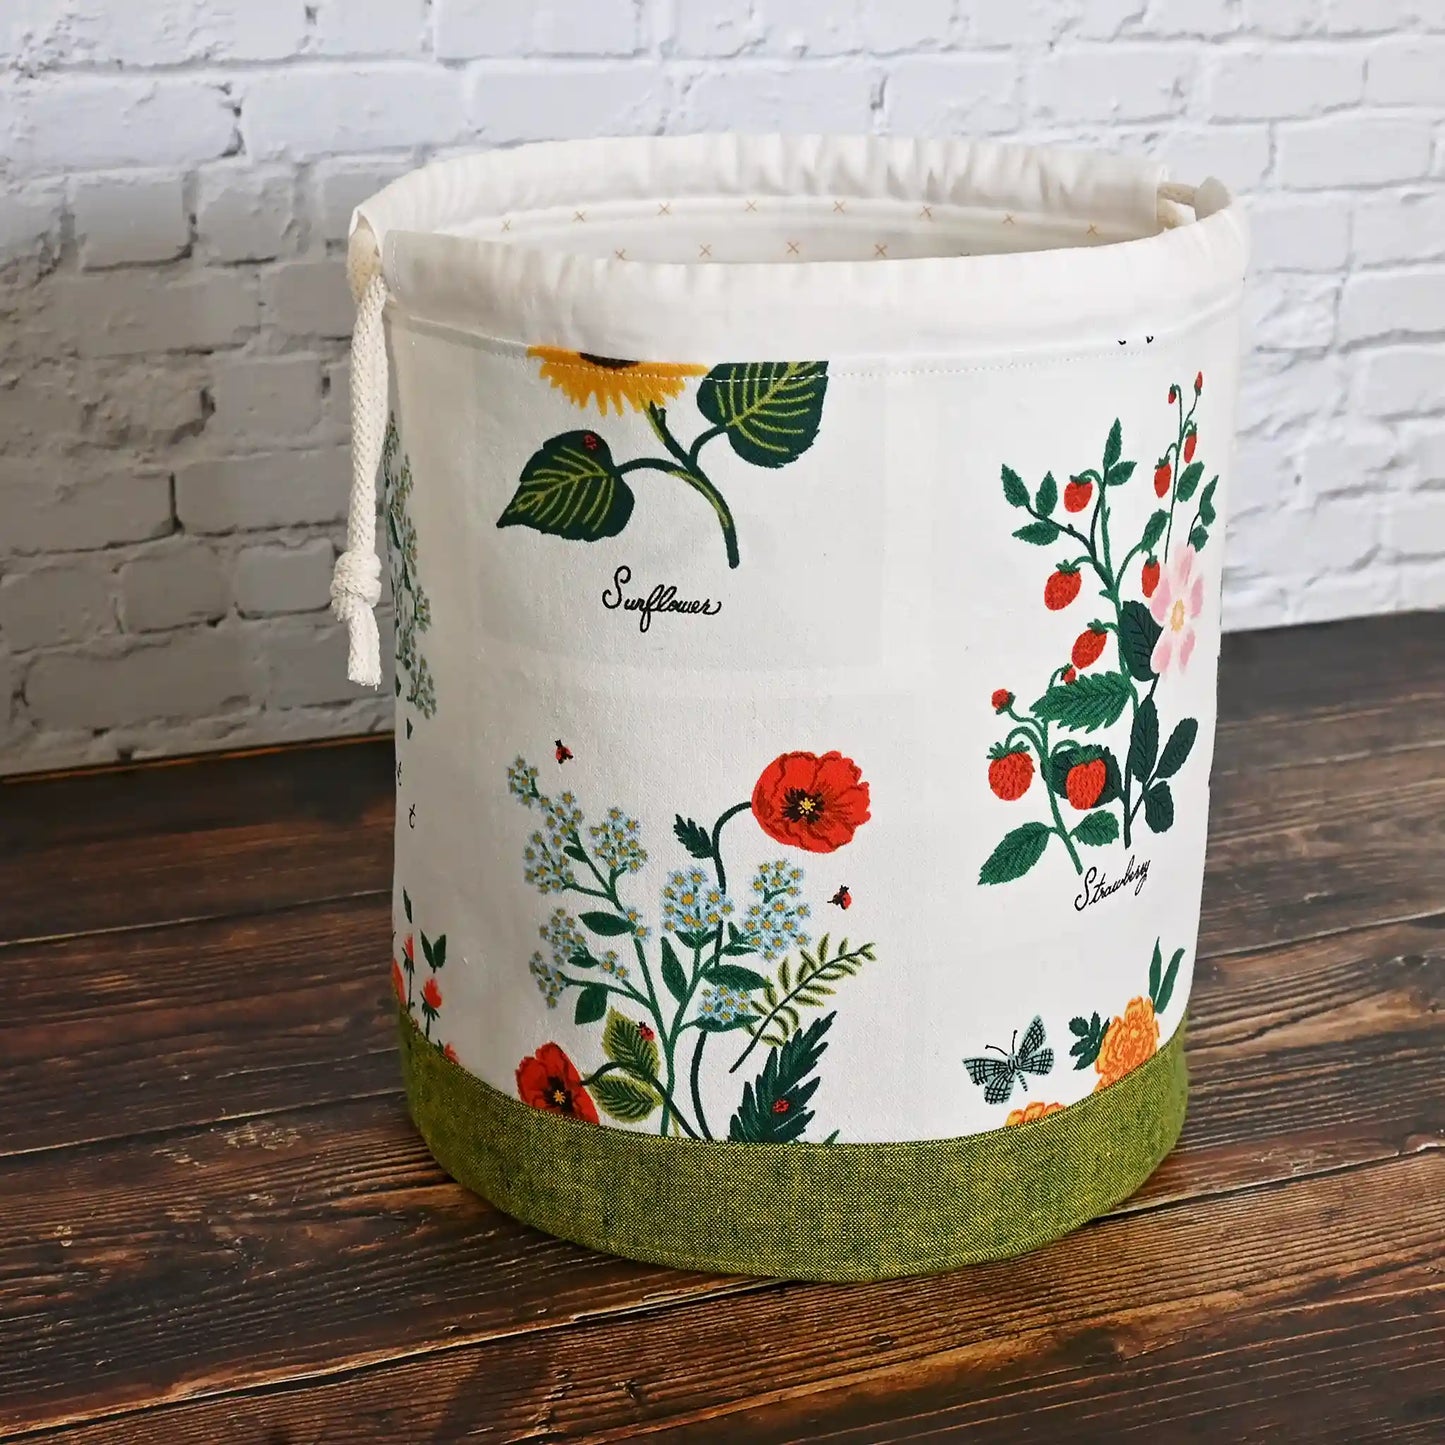 Stunning white floral project bag with green base and tons of pockets!  Great for needlework projects.  Made in Canada by Yellow Petal Handmade using Rifle Paper Co's Curio fabric collection.